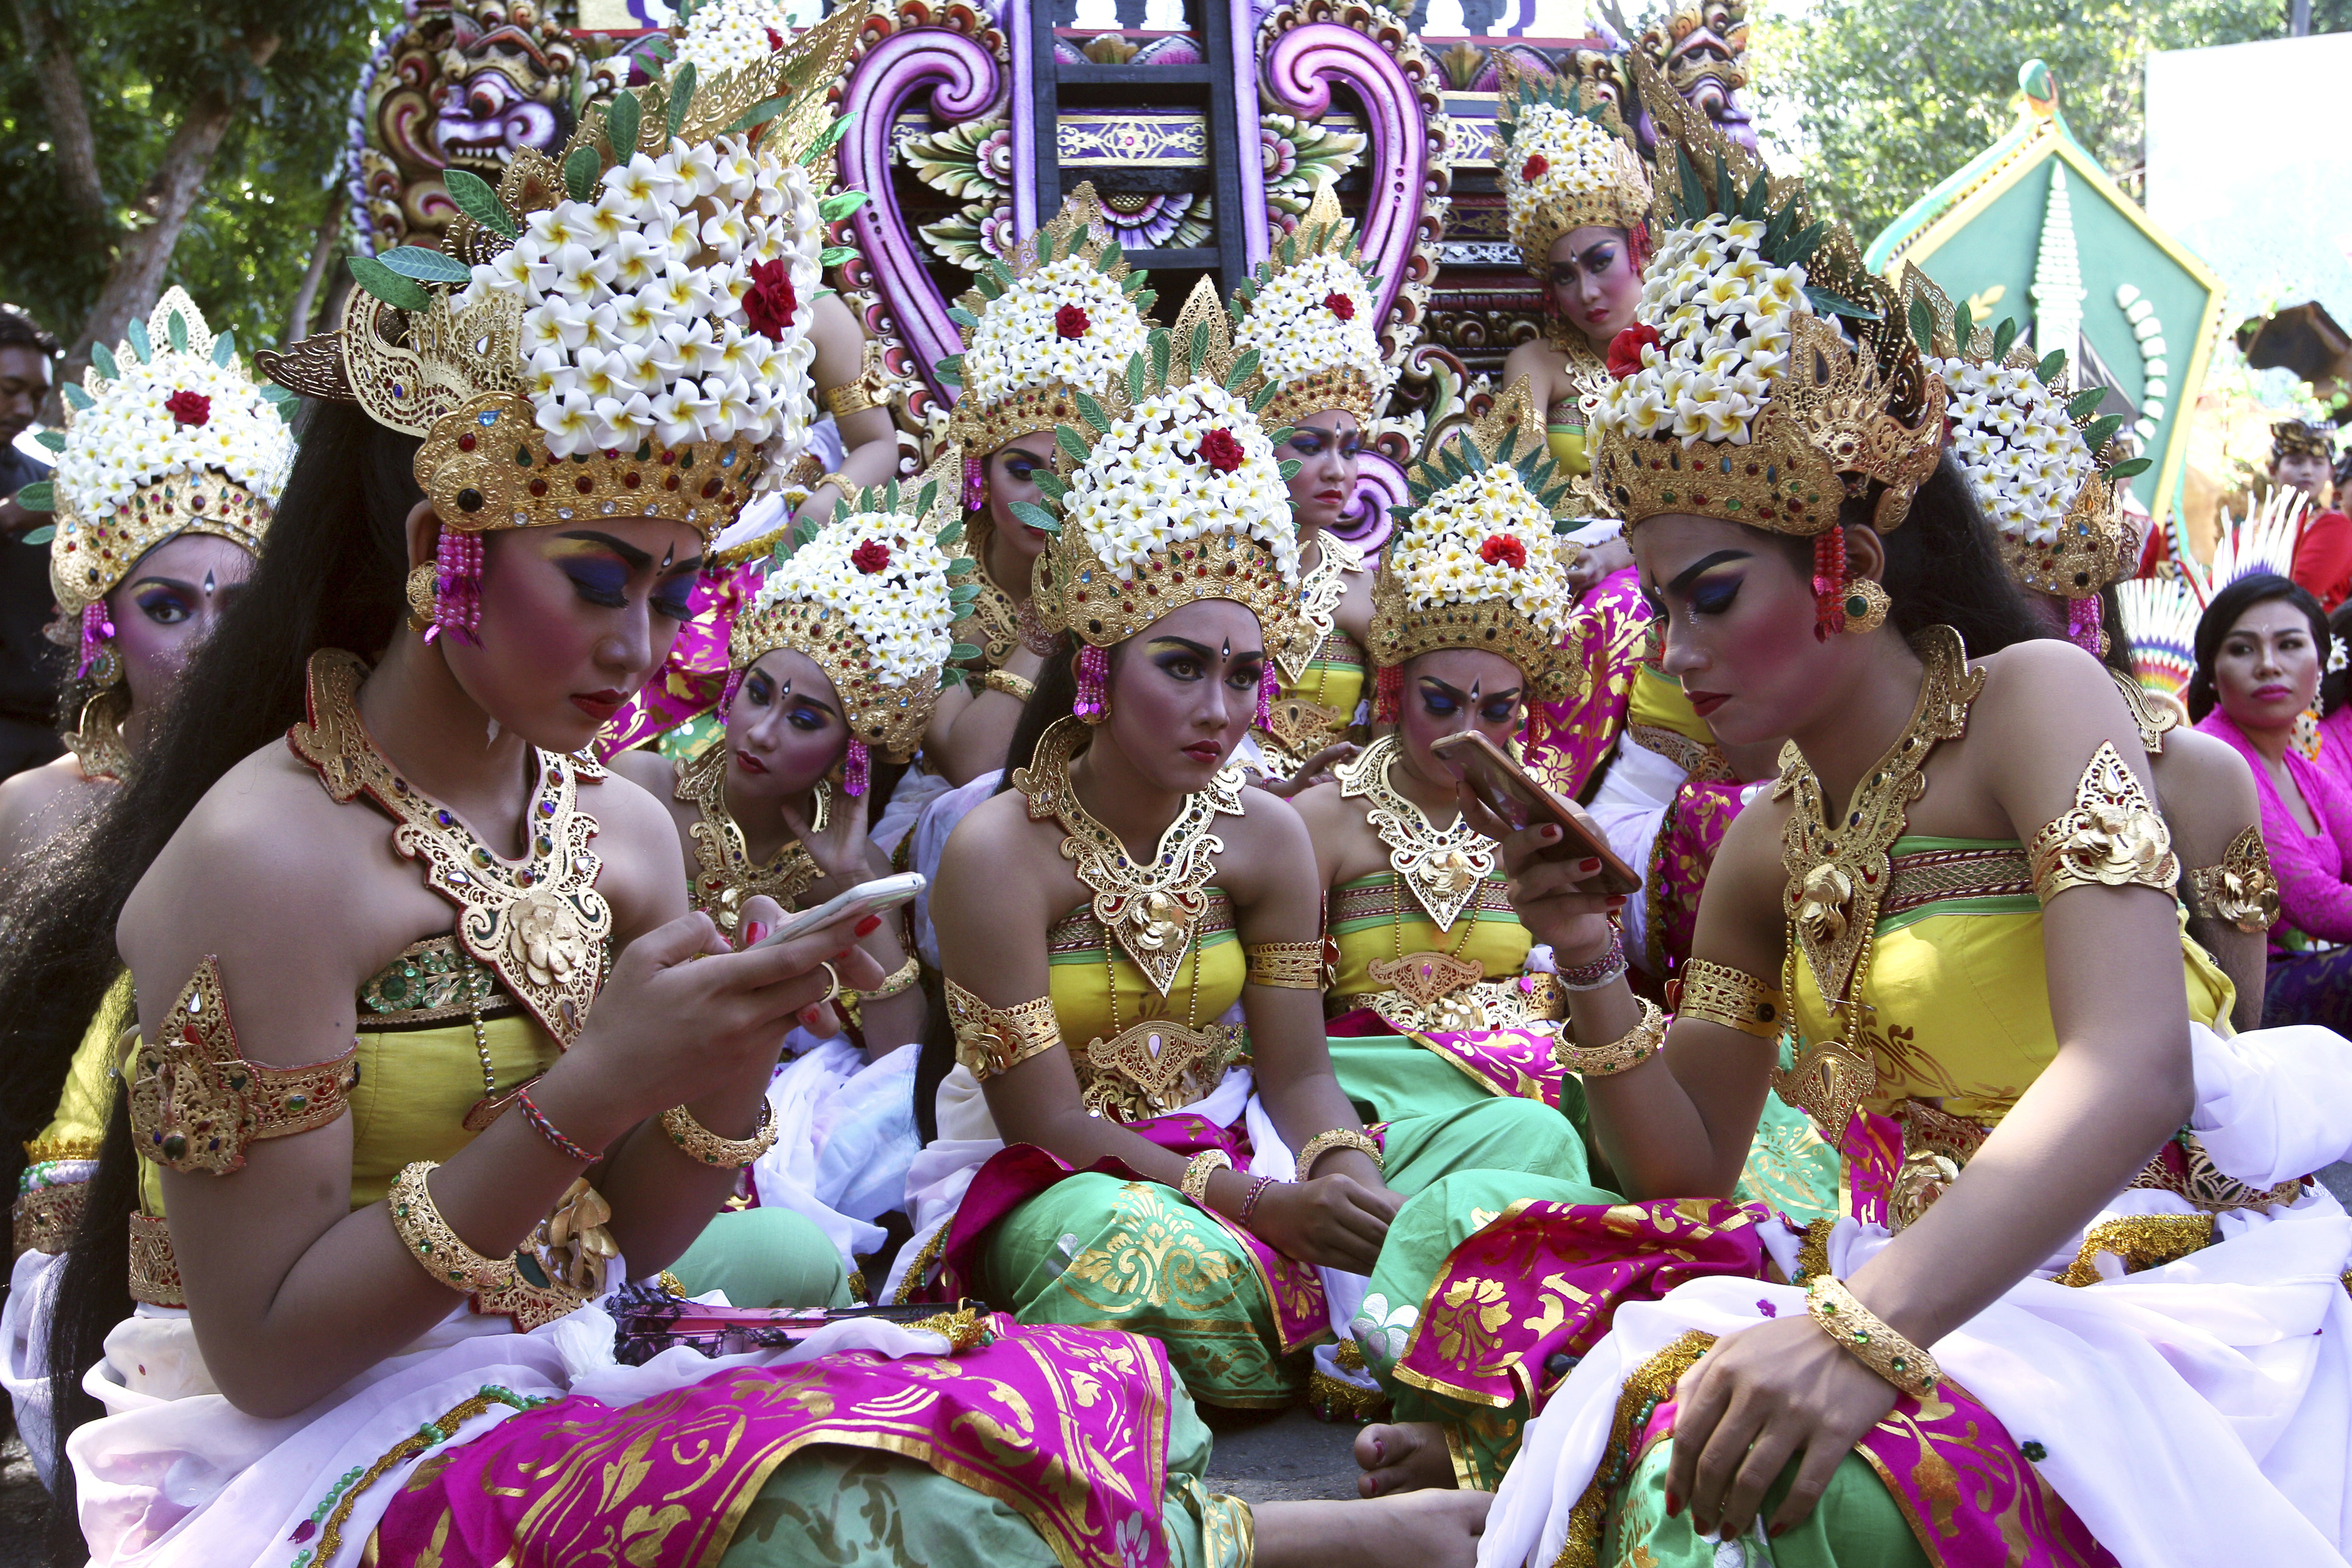 Dancers in traditional dress wait for a parade during the Bali Arts Festival in Bali, Indonesia, Saturday, June 10, 2017. A month-long annual festival started on Saturday. (AP Photo/Firdia Lisnawati)